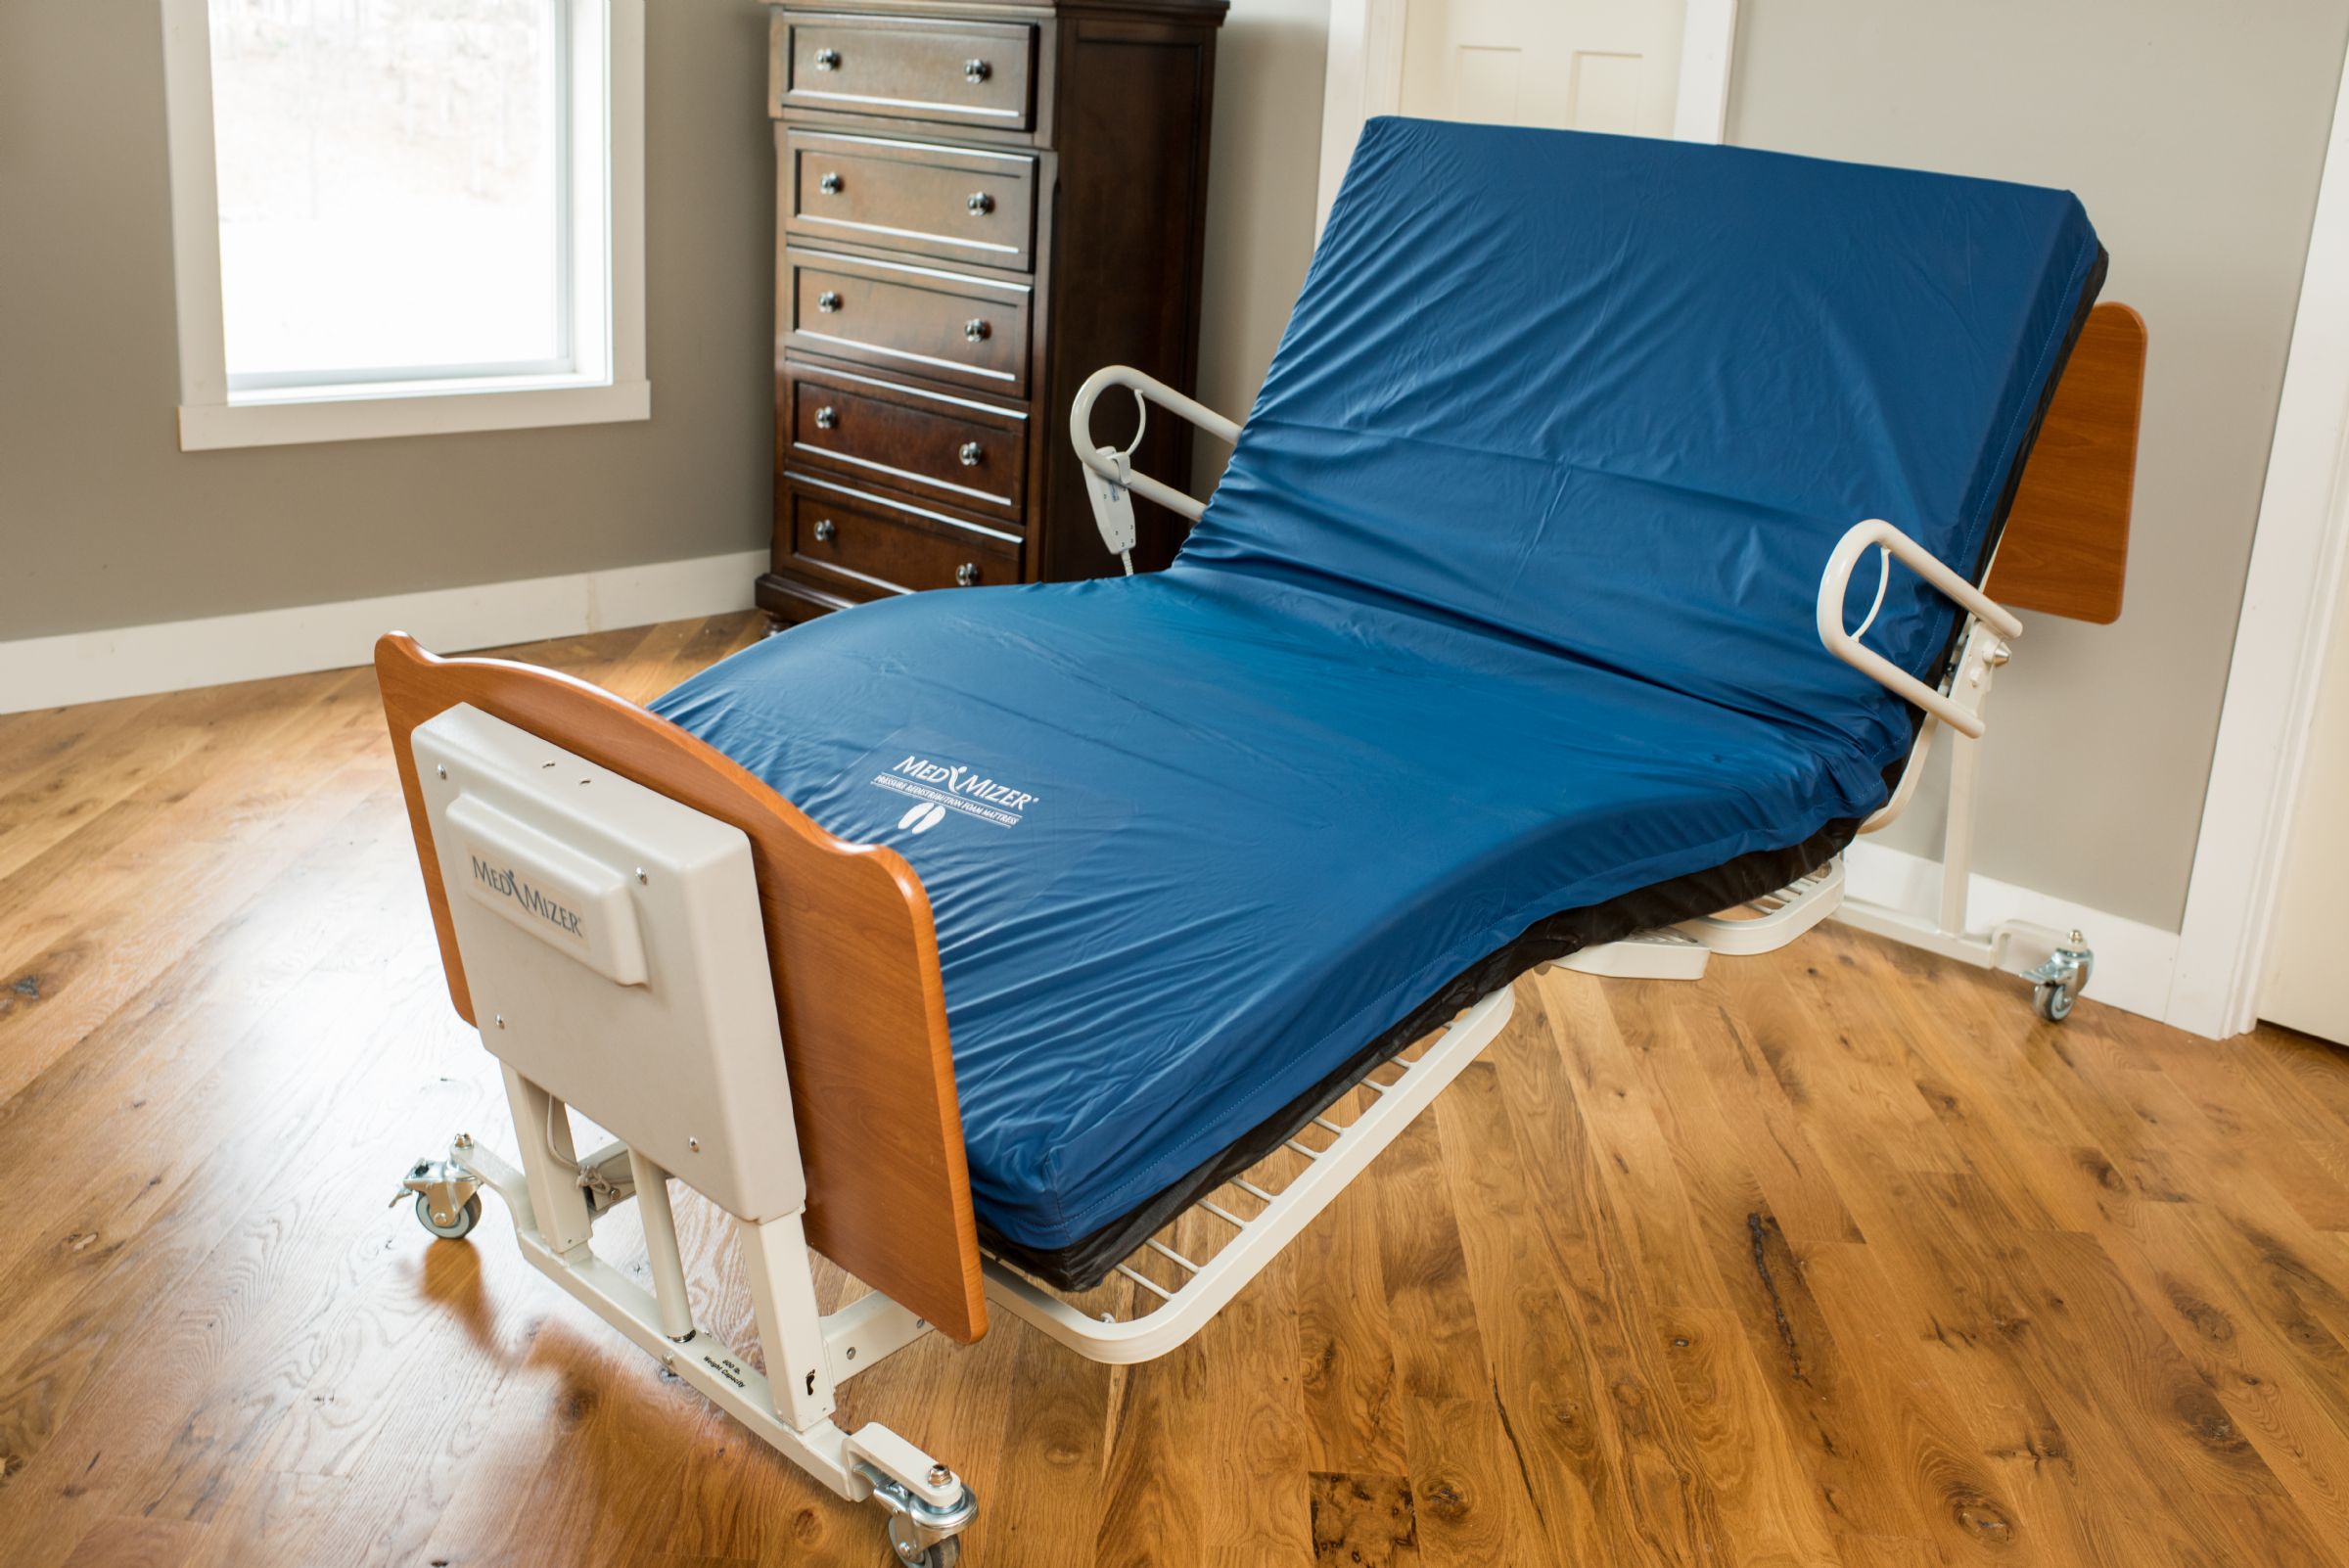 Smart' hospital beds take care of patients - The Star